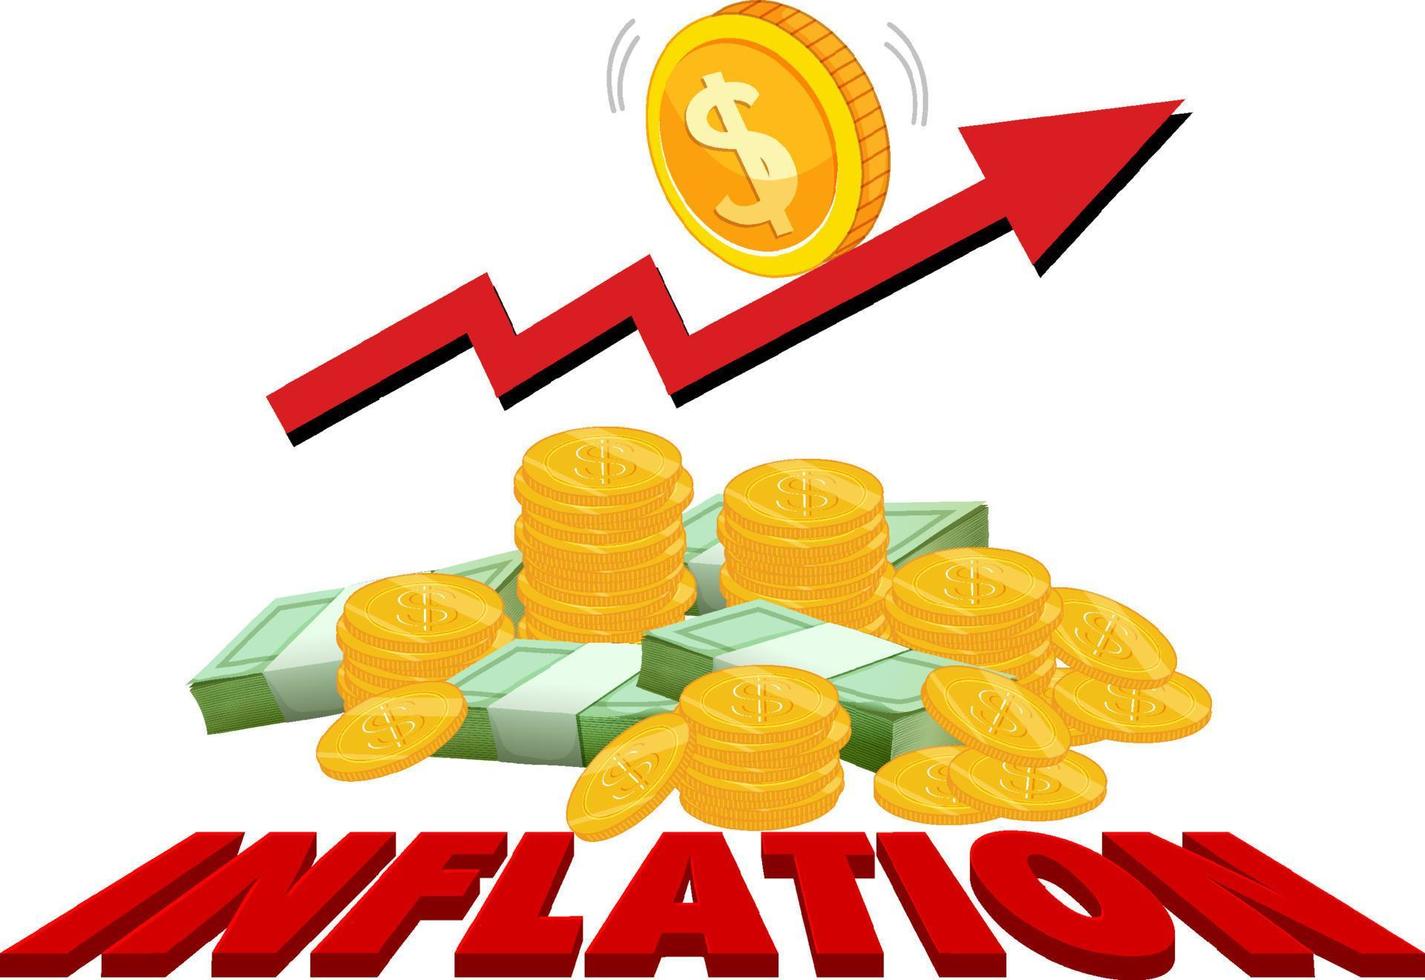 Inflation with red arrow going up vector